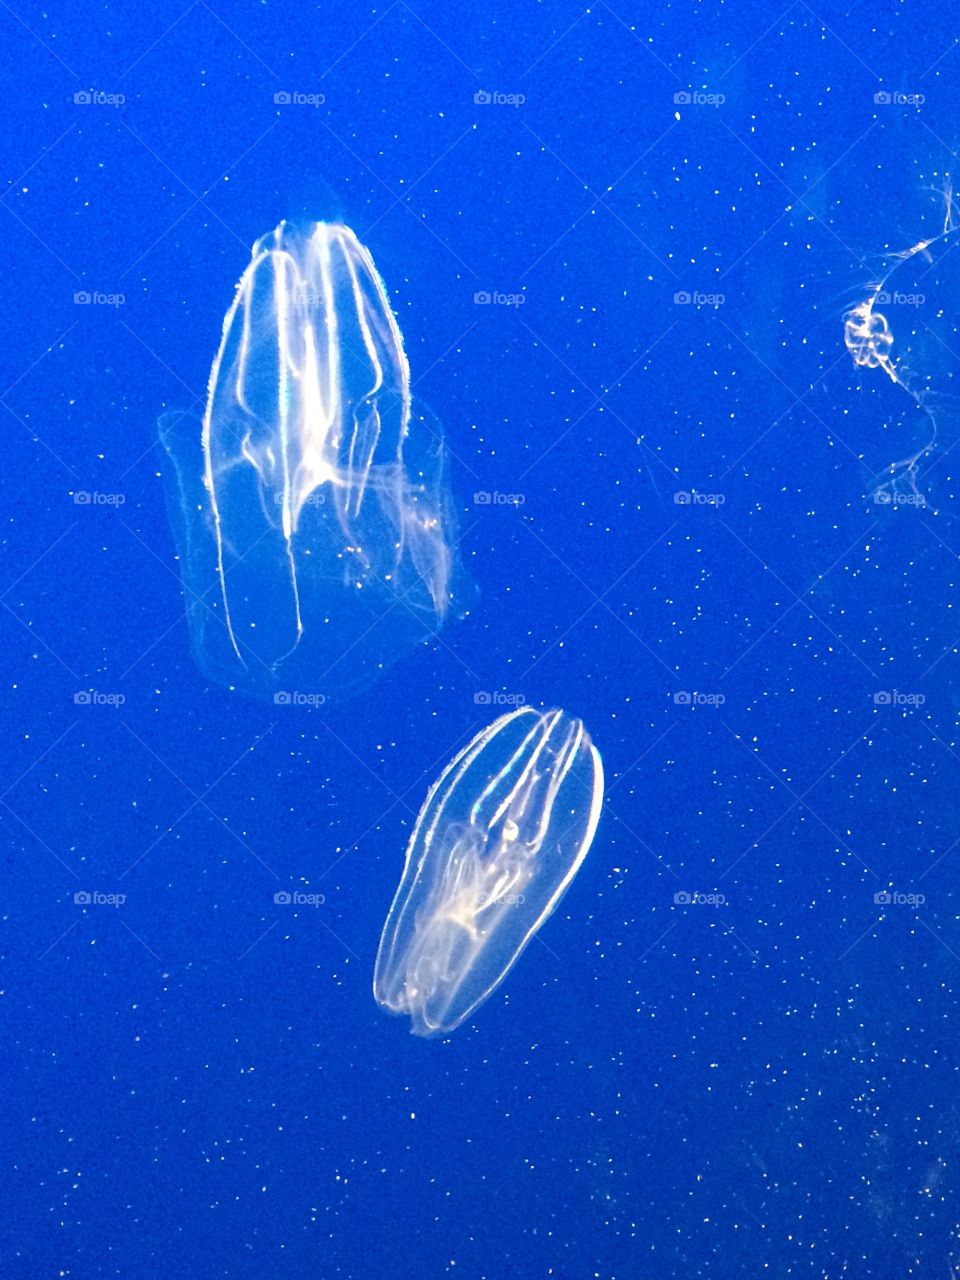 Warty Comb jellyfish at the Monterey Bay Aquarium. They glow in the dark :)